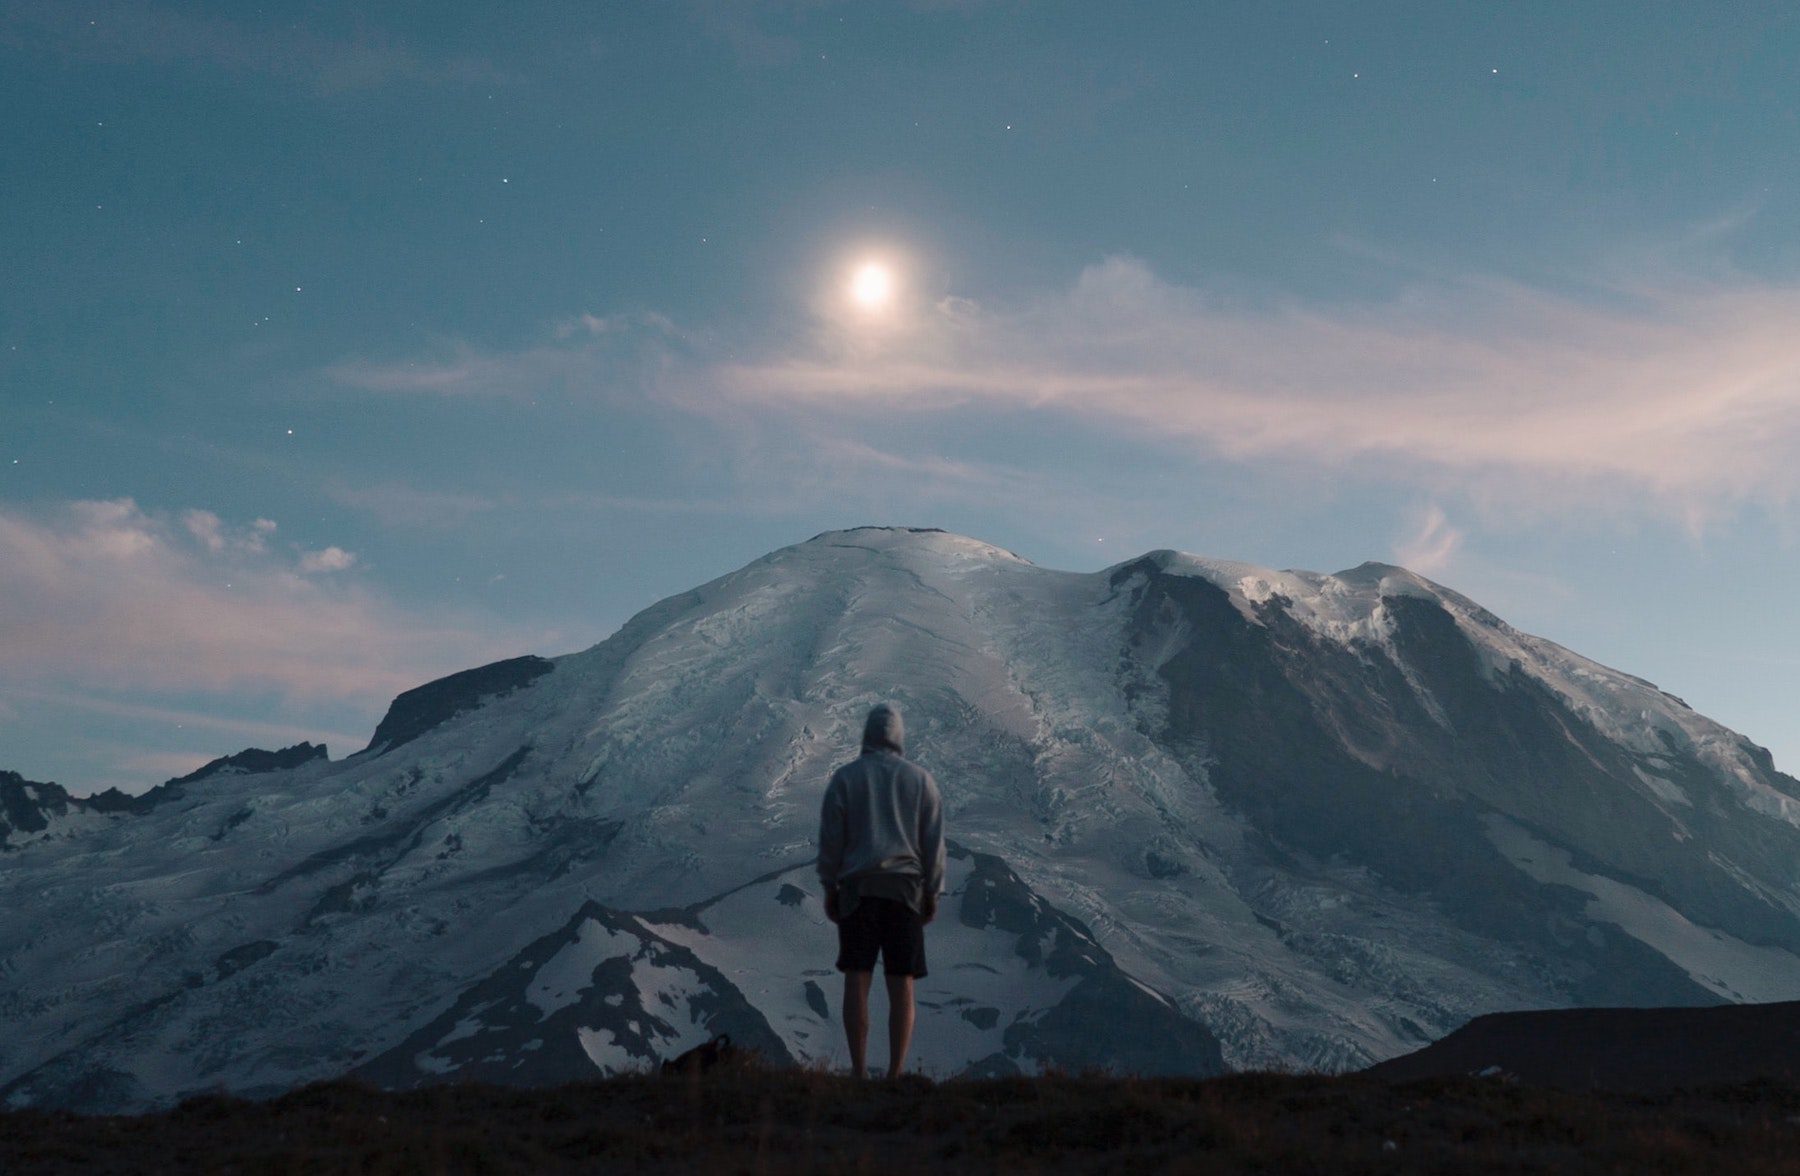 Lone hiker watching moonrise against a starry sky over a snowy peak at Mount Rainier.